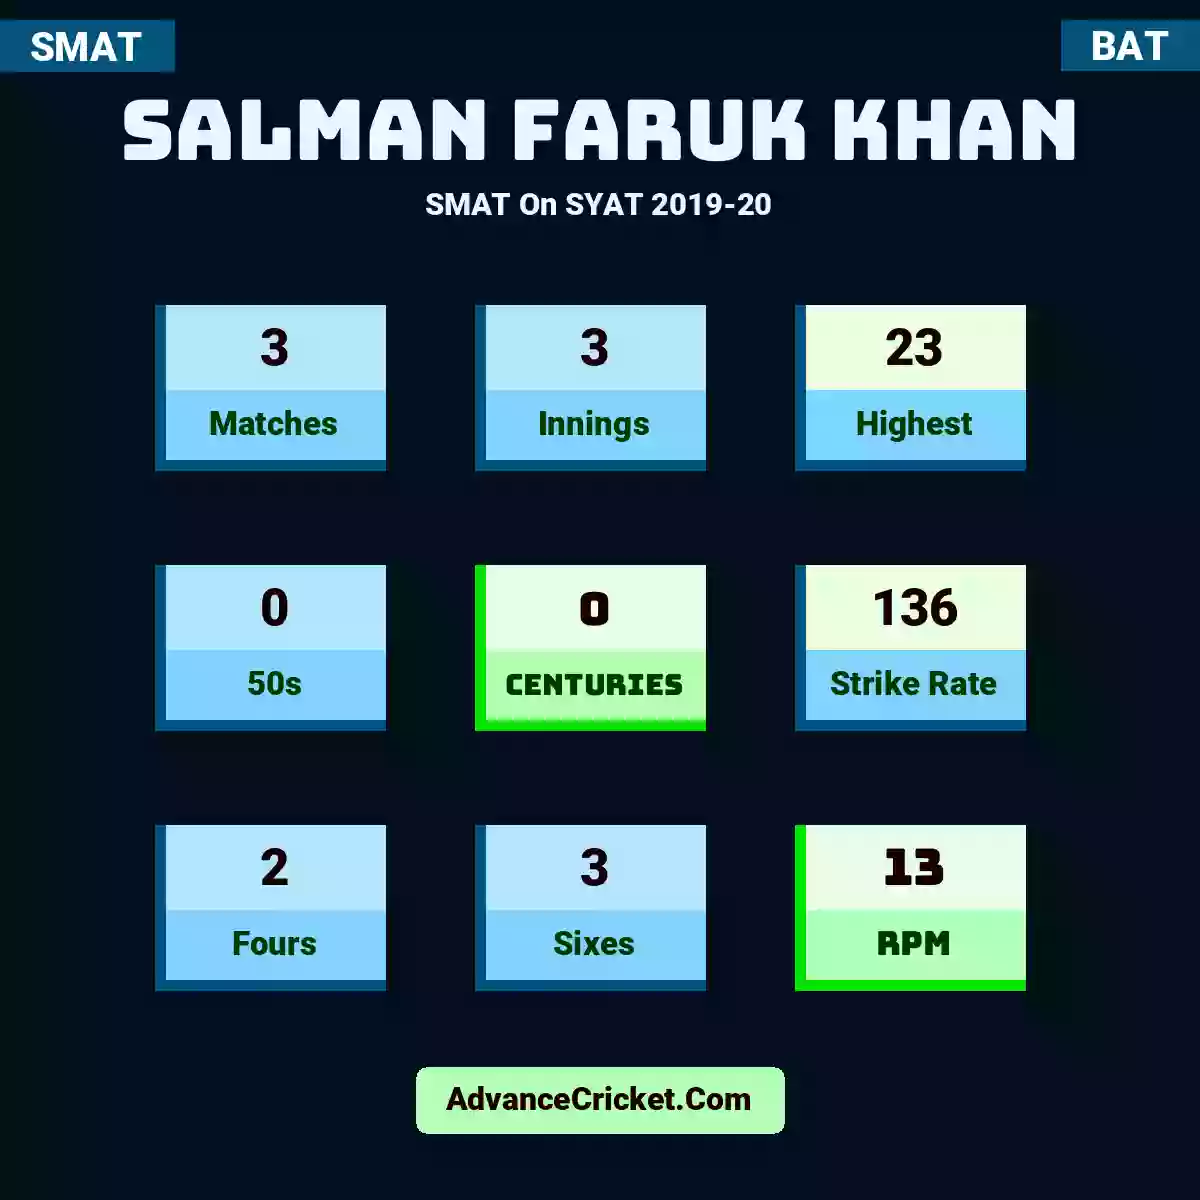 Salman Faruk Khan SMAT  On SYAT 2019-20, Salman Faruk Khan played 3 matches, scored 23 runs as highest, 0 half-centuries, and 0 centuries, with a strike rate of 136. S.Khan hit 2 fours and 3 sixes, with an RPM of 13.